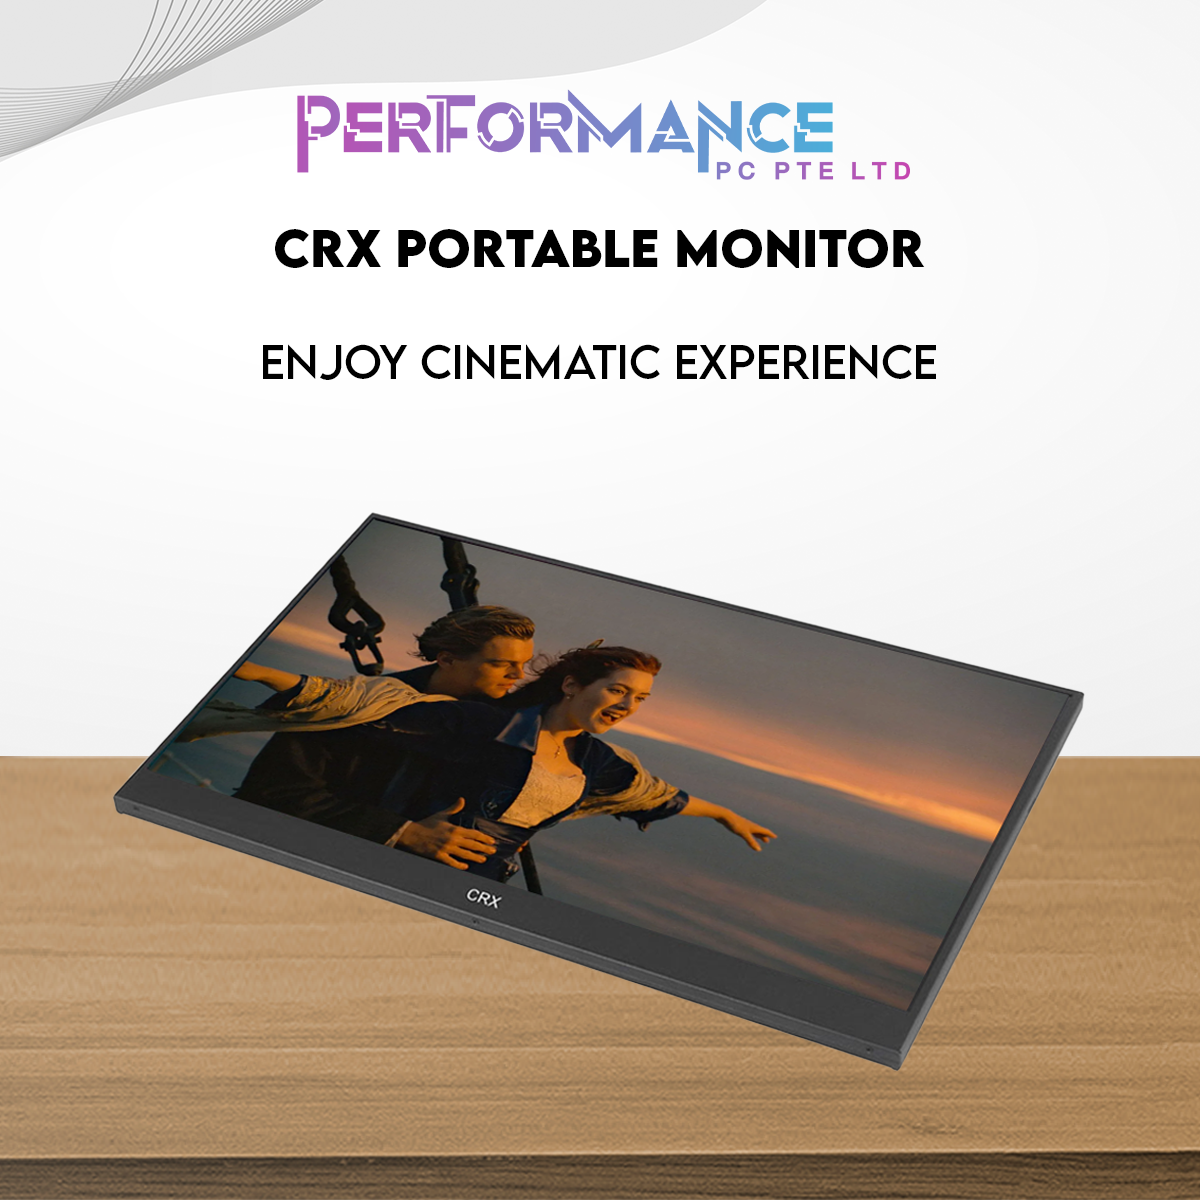 CRX Portable IPS Monitor For Gaming / Office / Student 13.3 / 15.6 / 16.0 / 17.3 / Full HD 1080P / QHD 1440P / 144hz / 165hz / IOS Device / Android / Desktop PC / Laptop / Extension / Duplicate[Local Ready Stock With Local 3 Year Warranty]